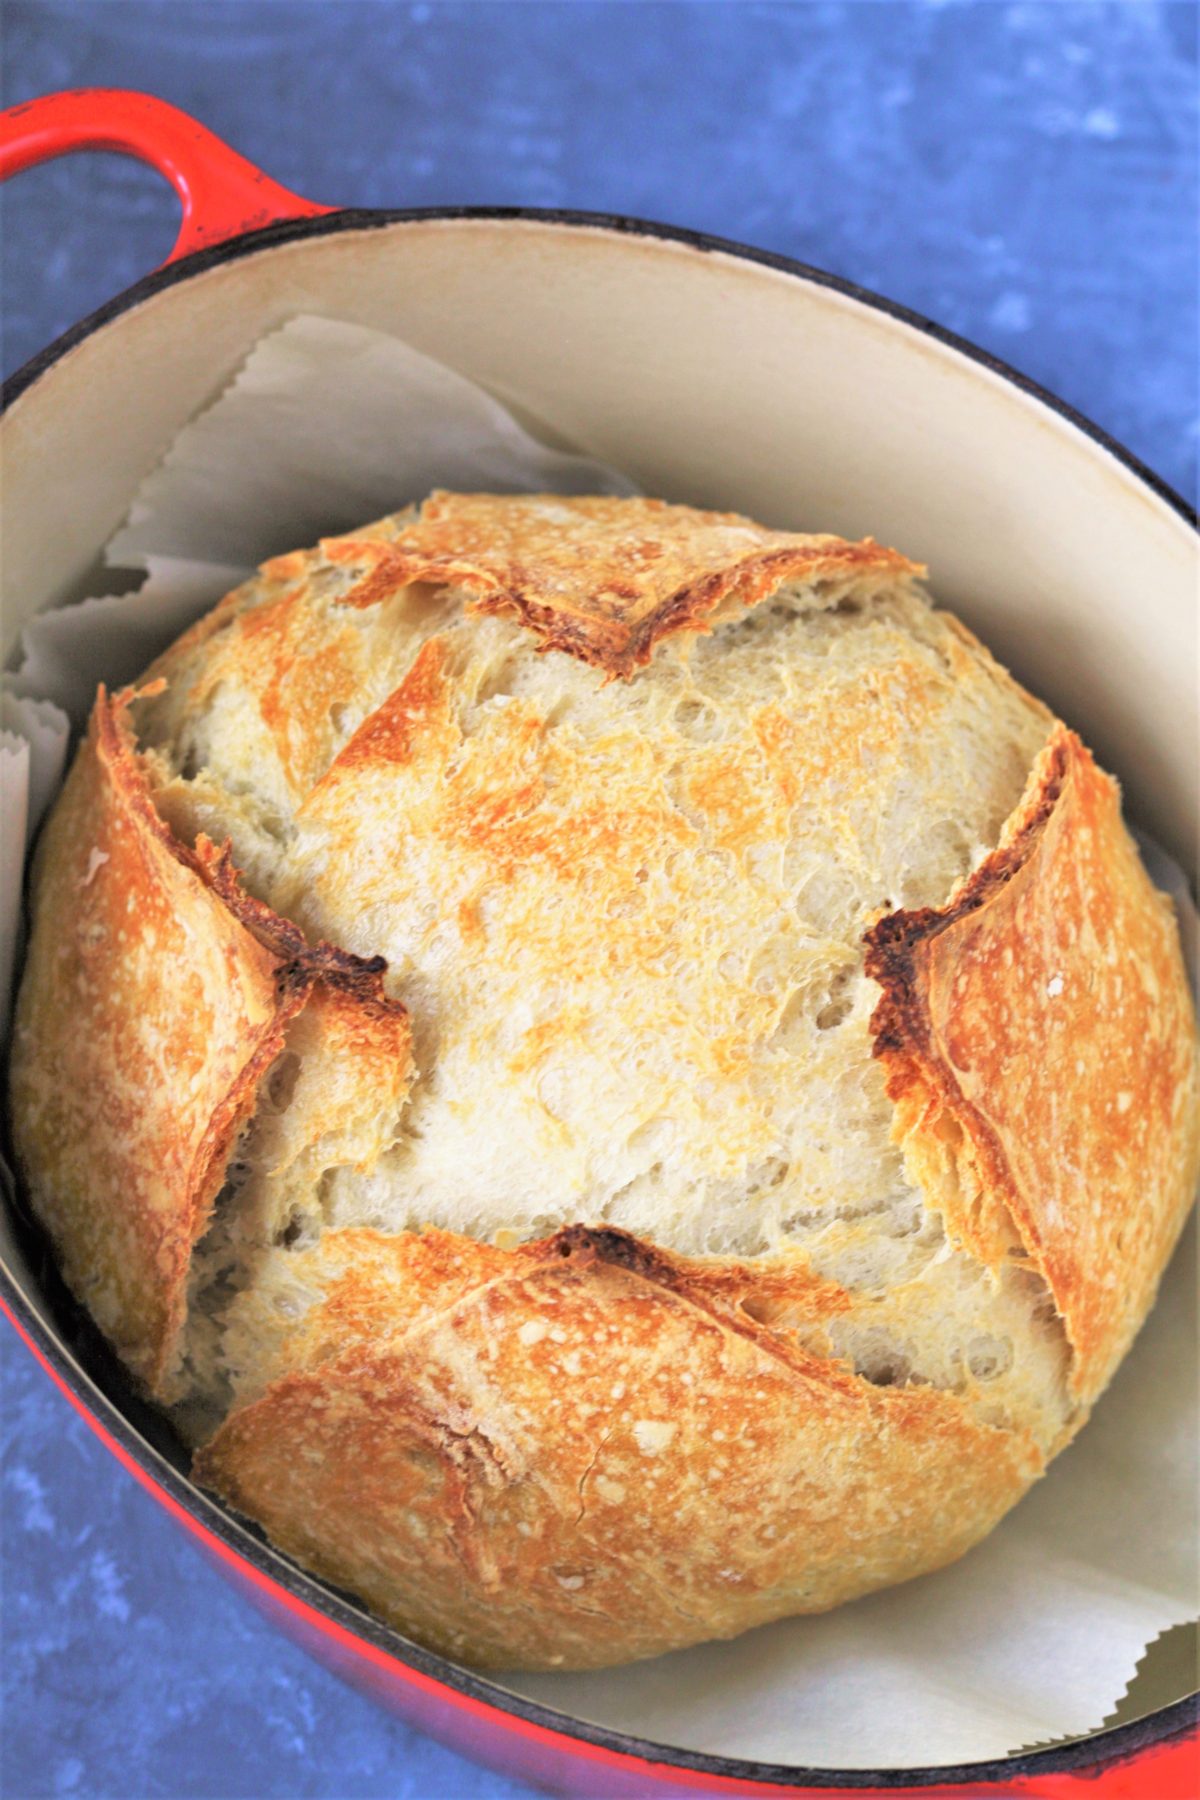 This easiest no knead bread recipe requires just FOUR basic ingredients and results in a perfectly crusty, golden artisan-style loaf with amazing chewy texture - either with an overnight method or a fast rise method!